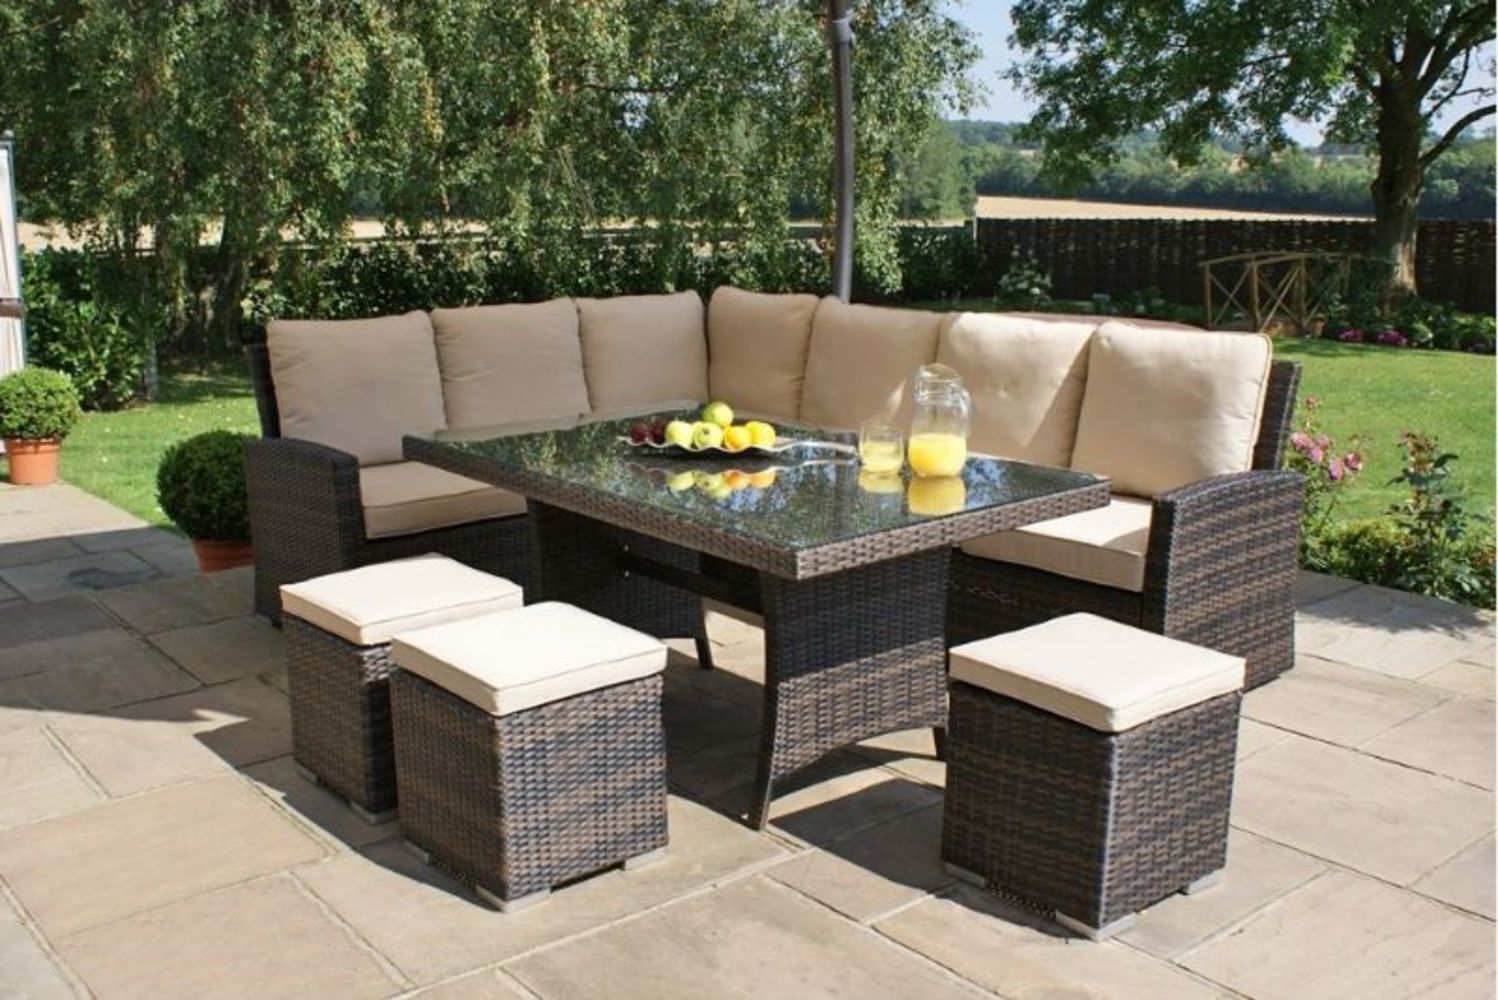 "The Chelsea Garden Co" - Brand New Rattan Garden Furniture & Patio Heaters: Dining Sets, Sofa Sets, Sun Loungers, Egg Chairs and More